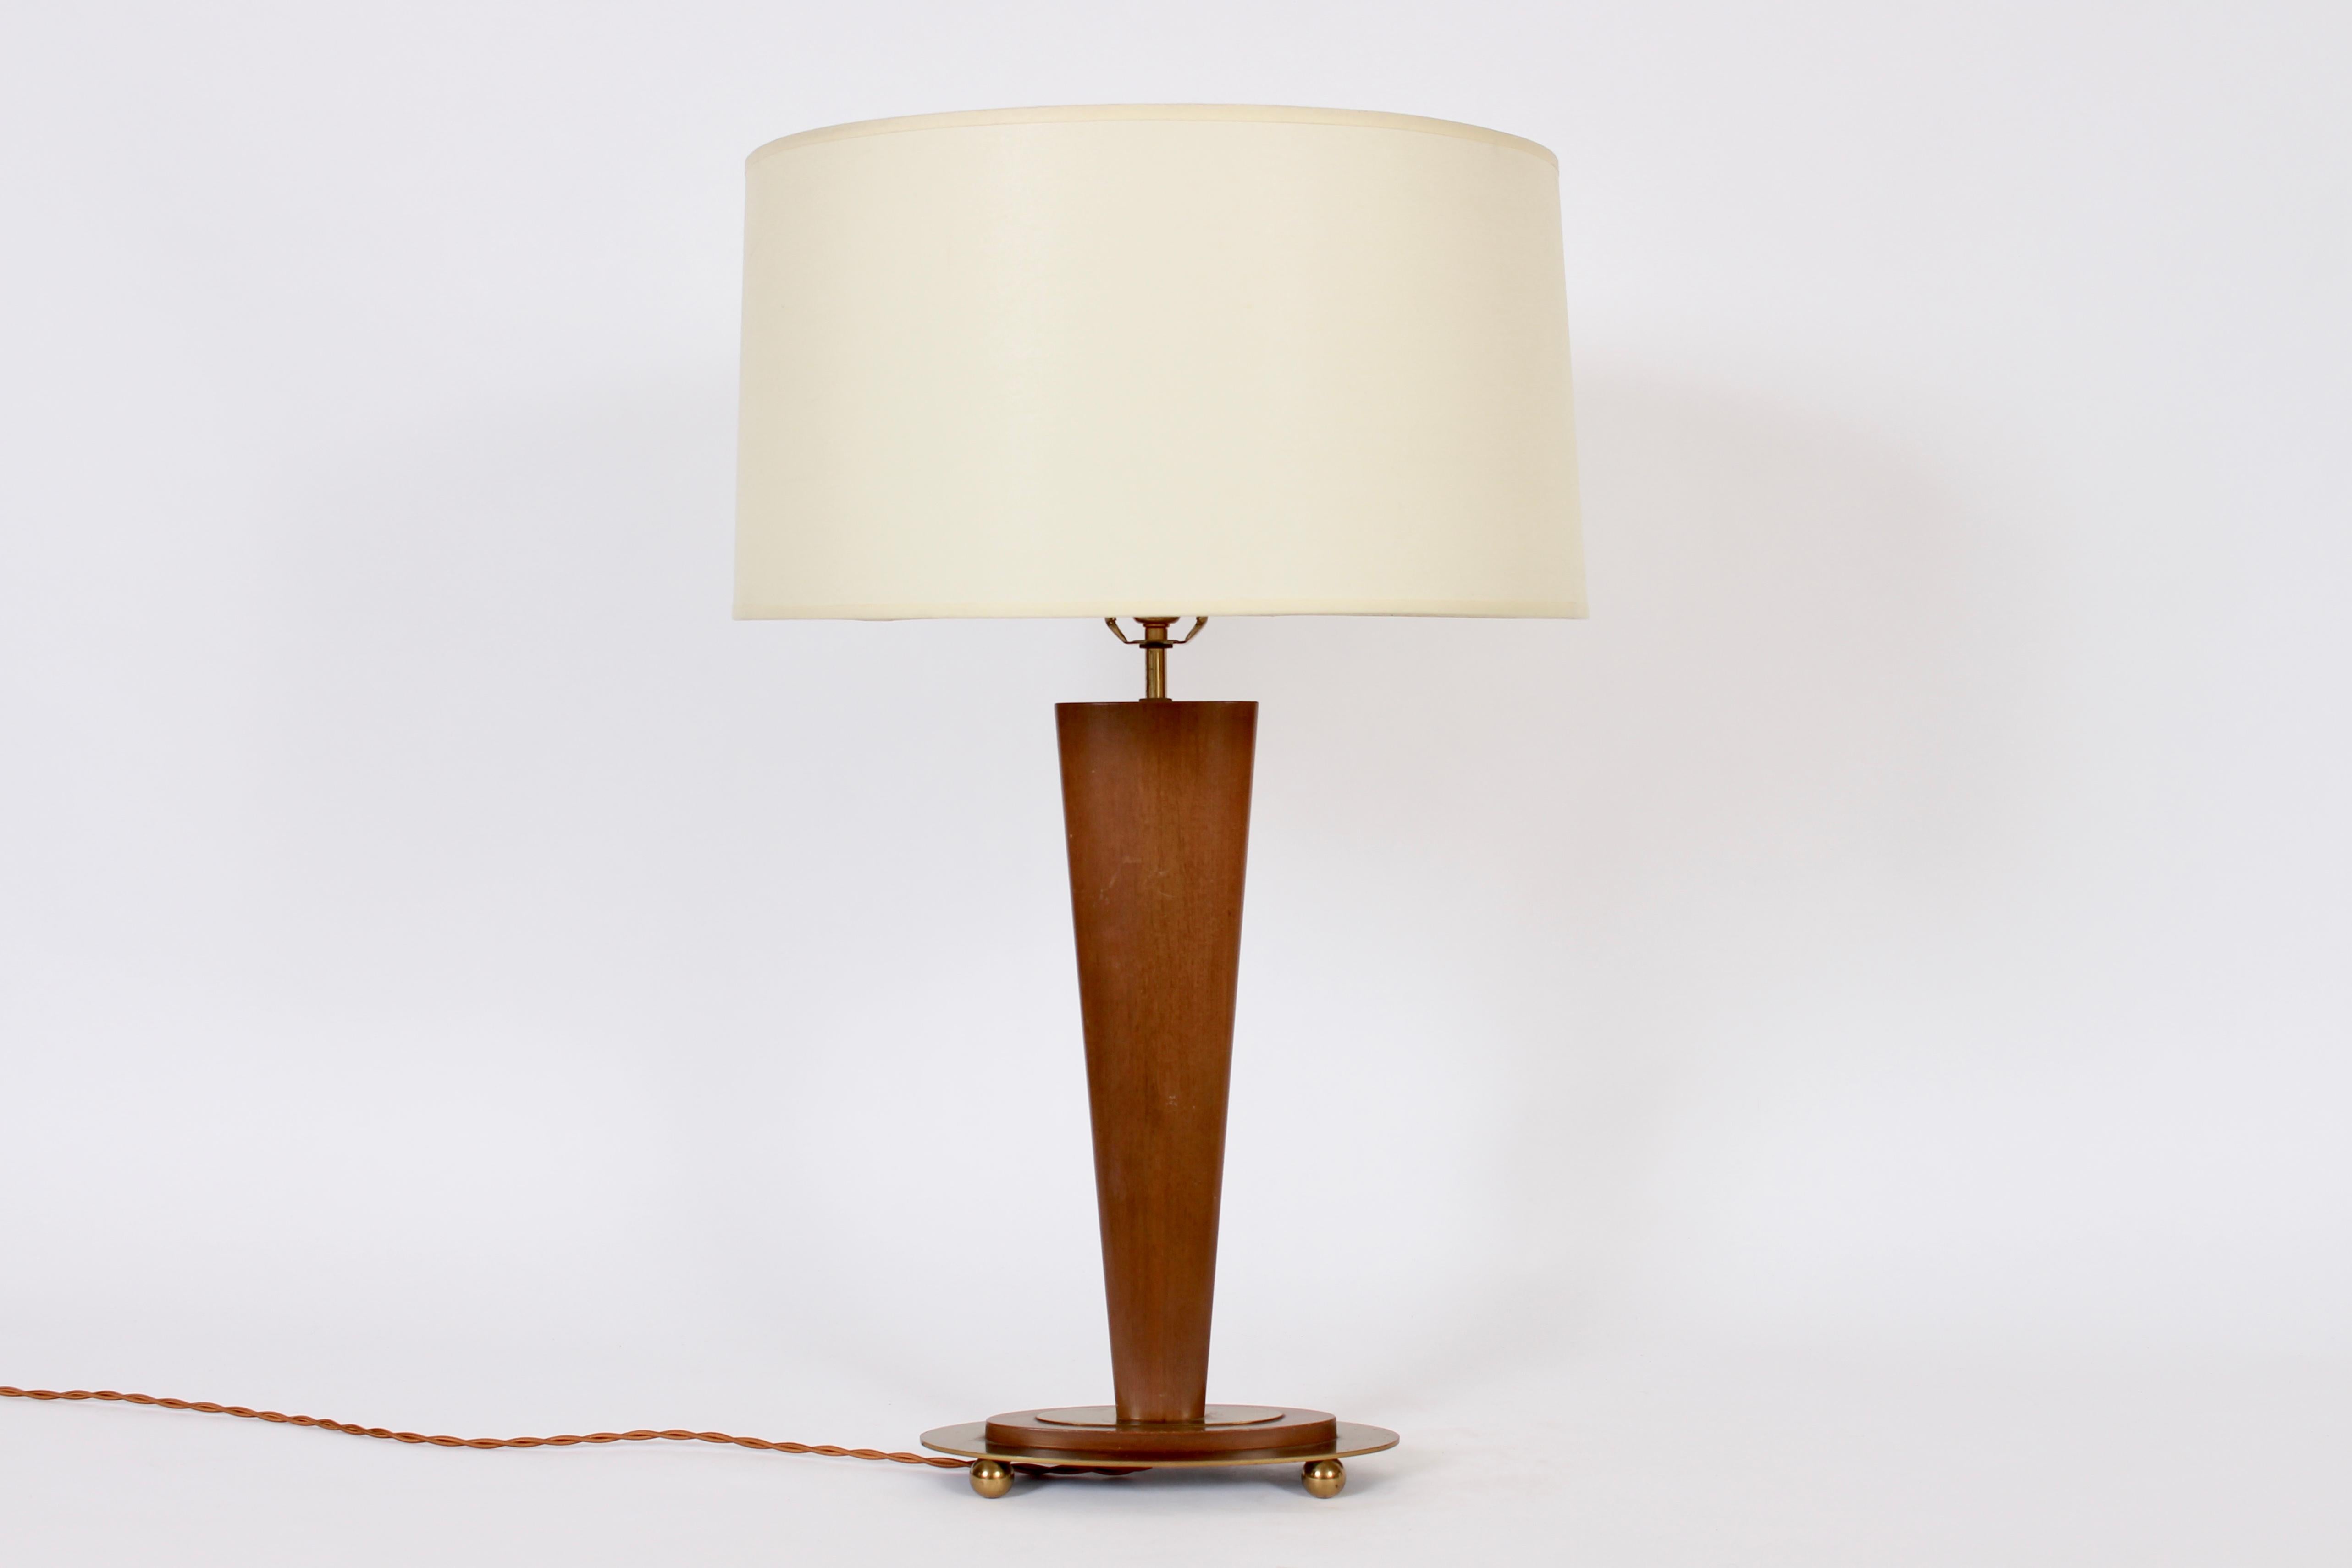 Mutual Sunset Lamp Company Walnut and Brass tri-form footed reading Table Lamp. Featuring a triangular walnut column on oval walnut and brass accented base, elevated with four brass balls. 22 H to top of socket. 18 H to top of walnut. Small